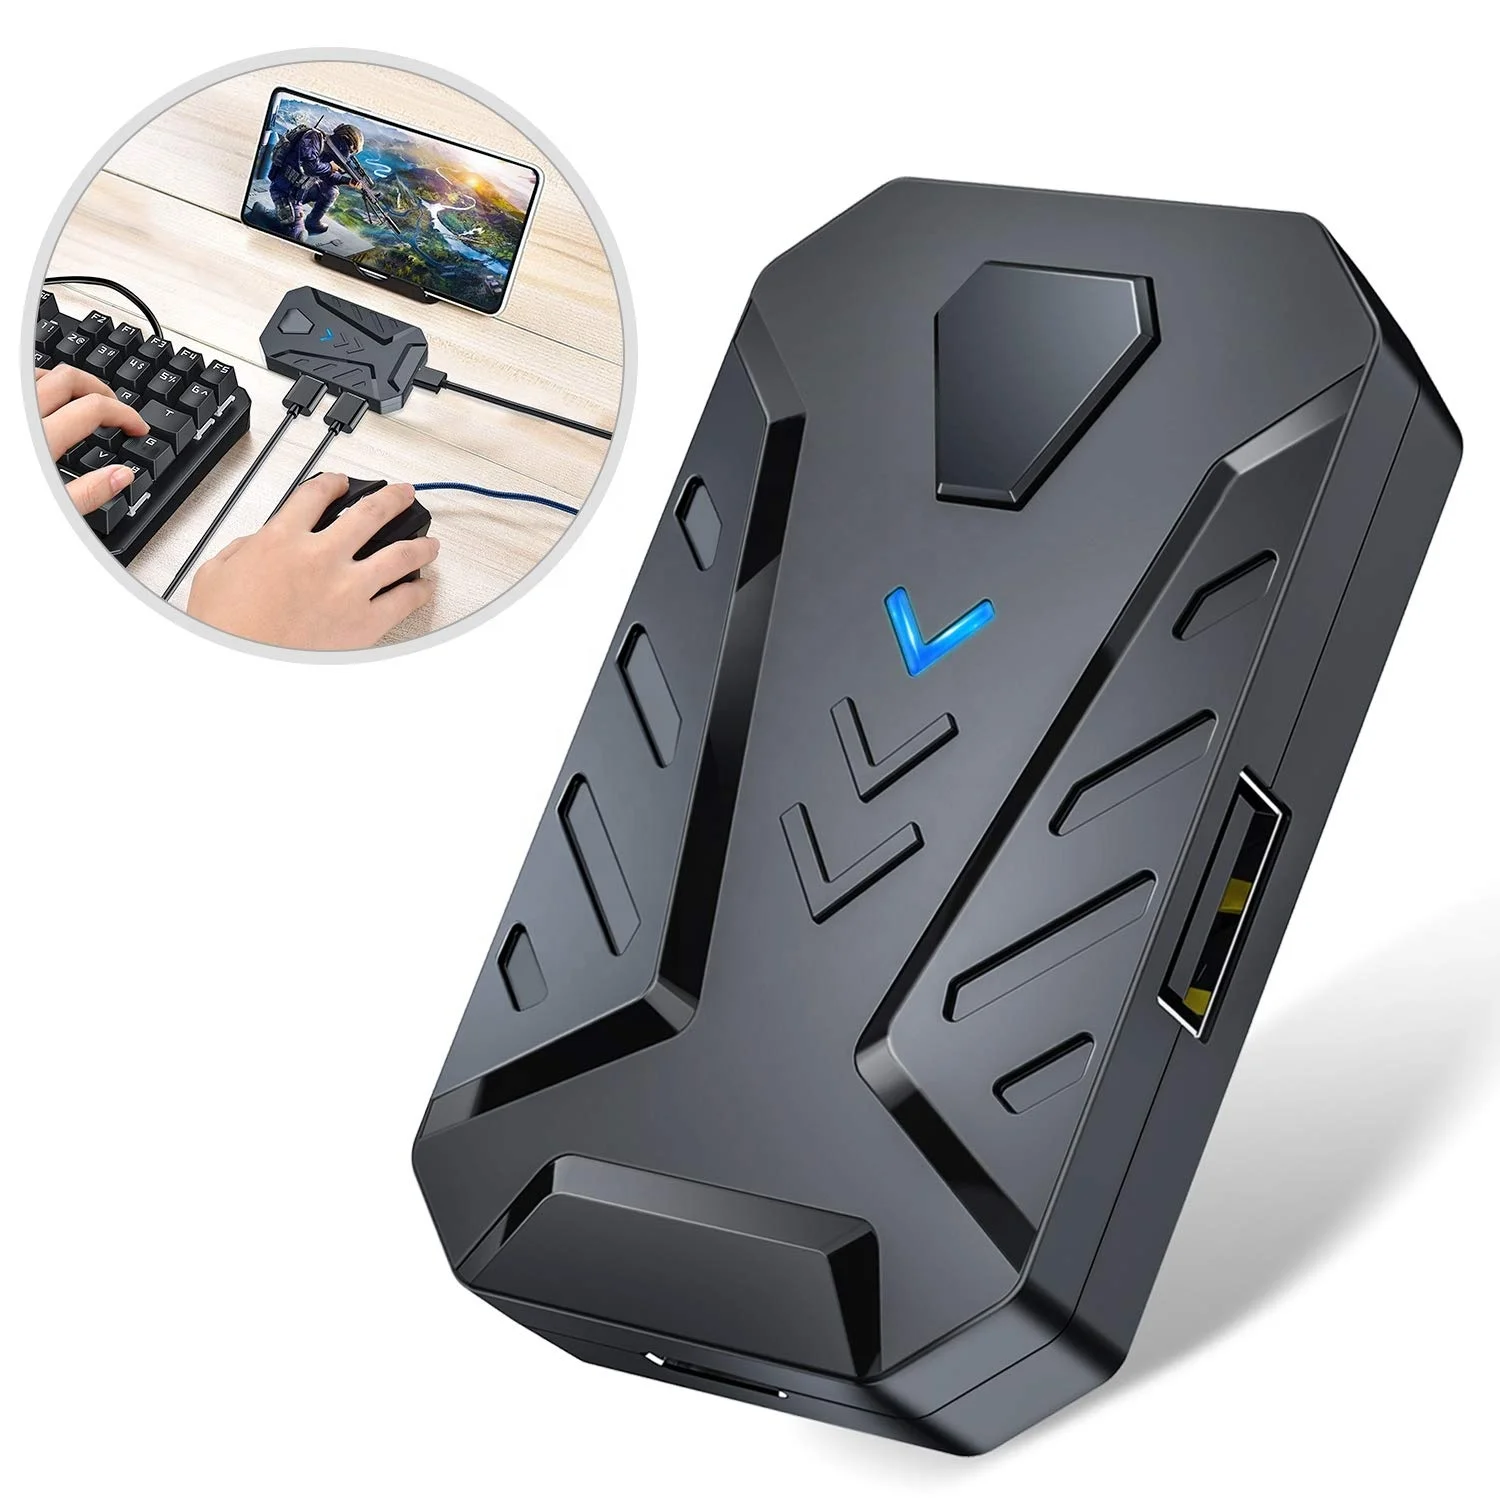 

[Only Converter] Gamwing MIX Pro Wireless Game Converter for IOS & Android Mobile Game Controllers Combo with Powerbank